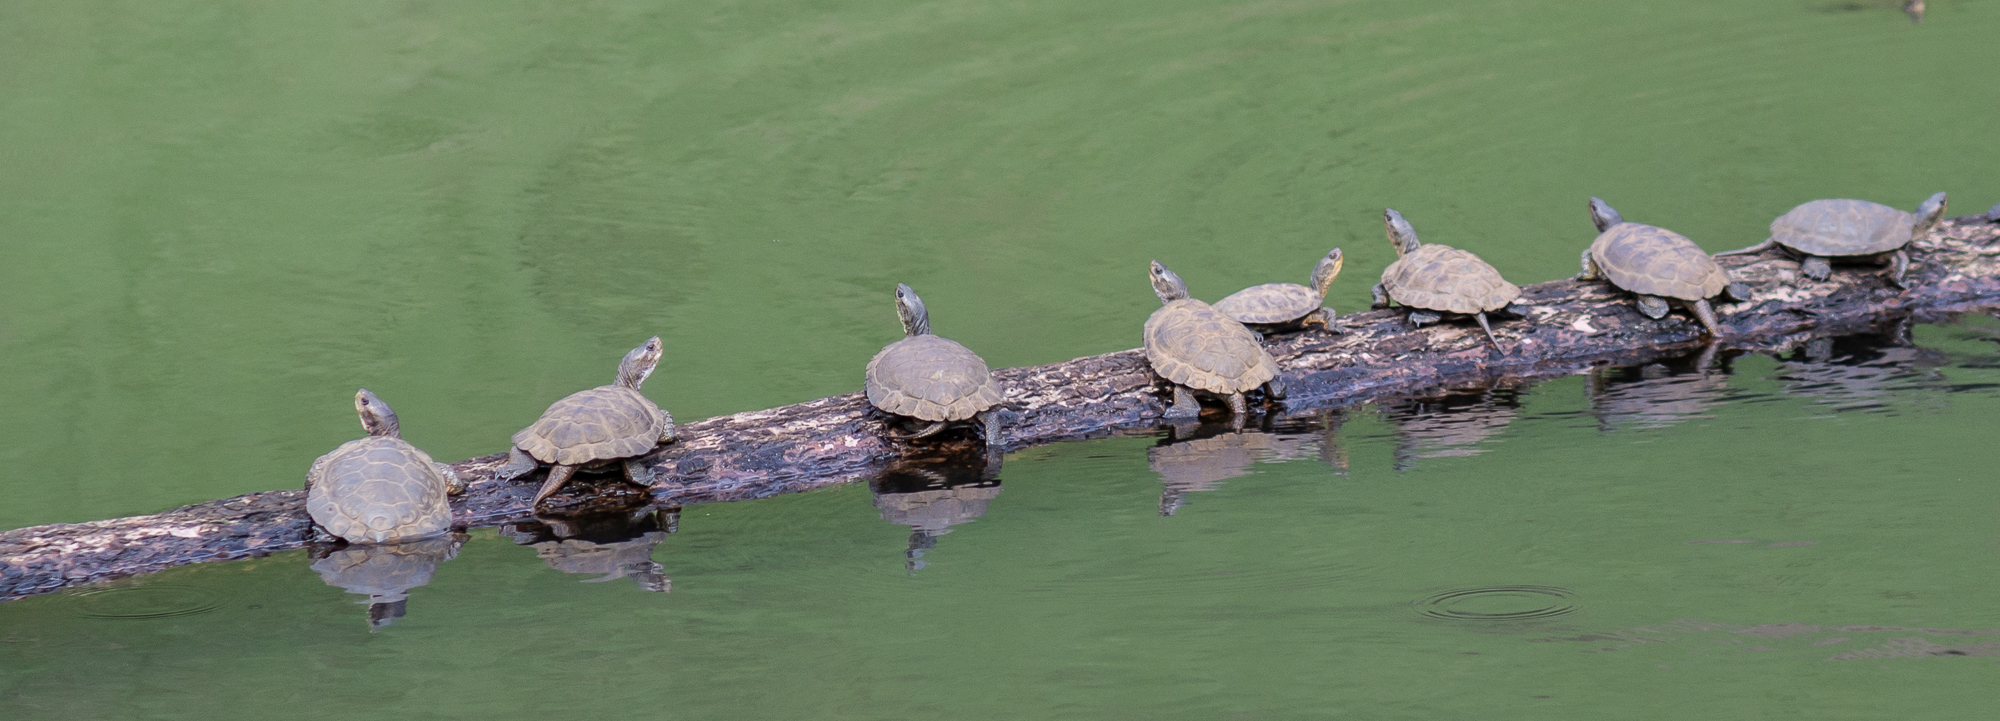 2018-19 Annual Report: Partnering for Pond Turtles